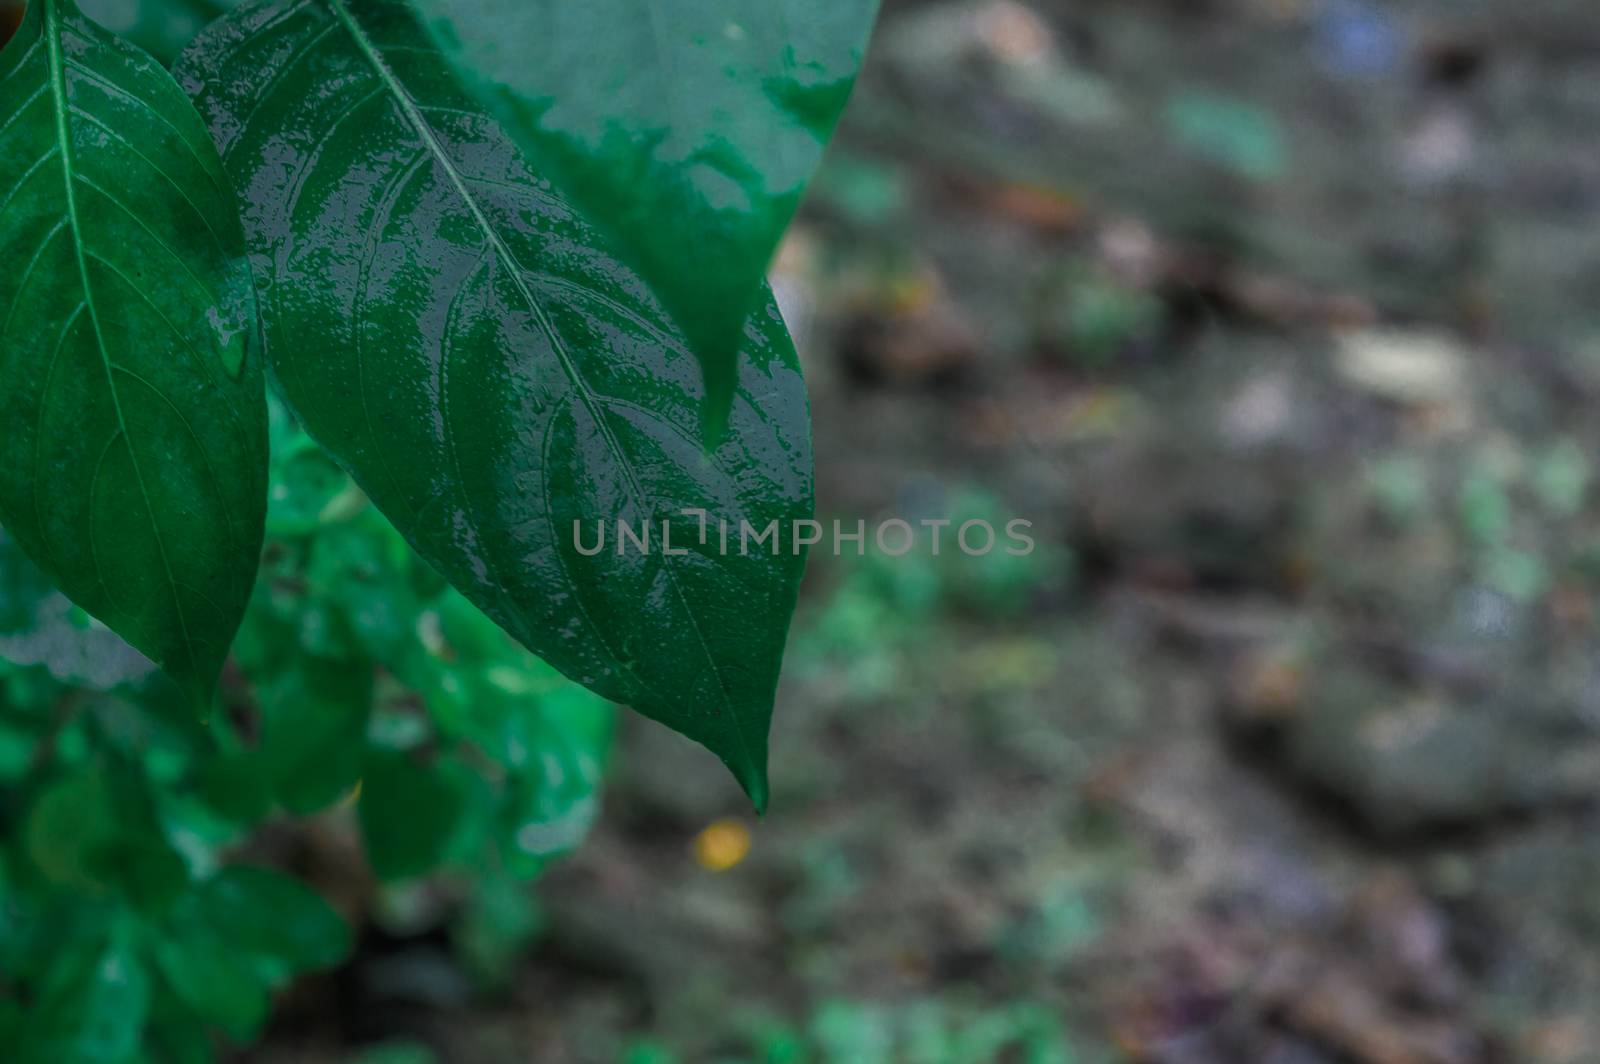 Leaves in rain. Wet in water. Beautiful Home Decor Plant drenched in rain. Green leaves background design images. Pictures of nature beauty. rainy day monsoon season pictures for wallpaper decoration. by sudiptabhowmick